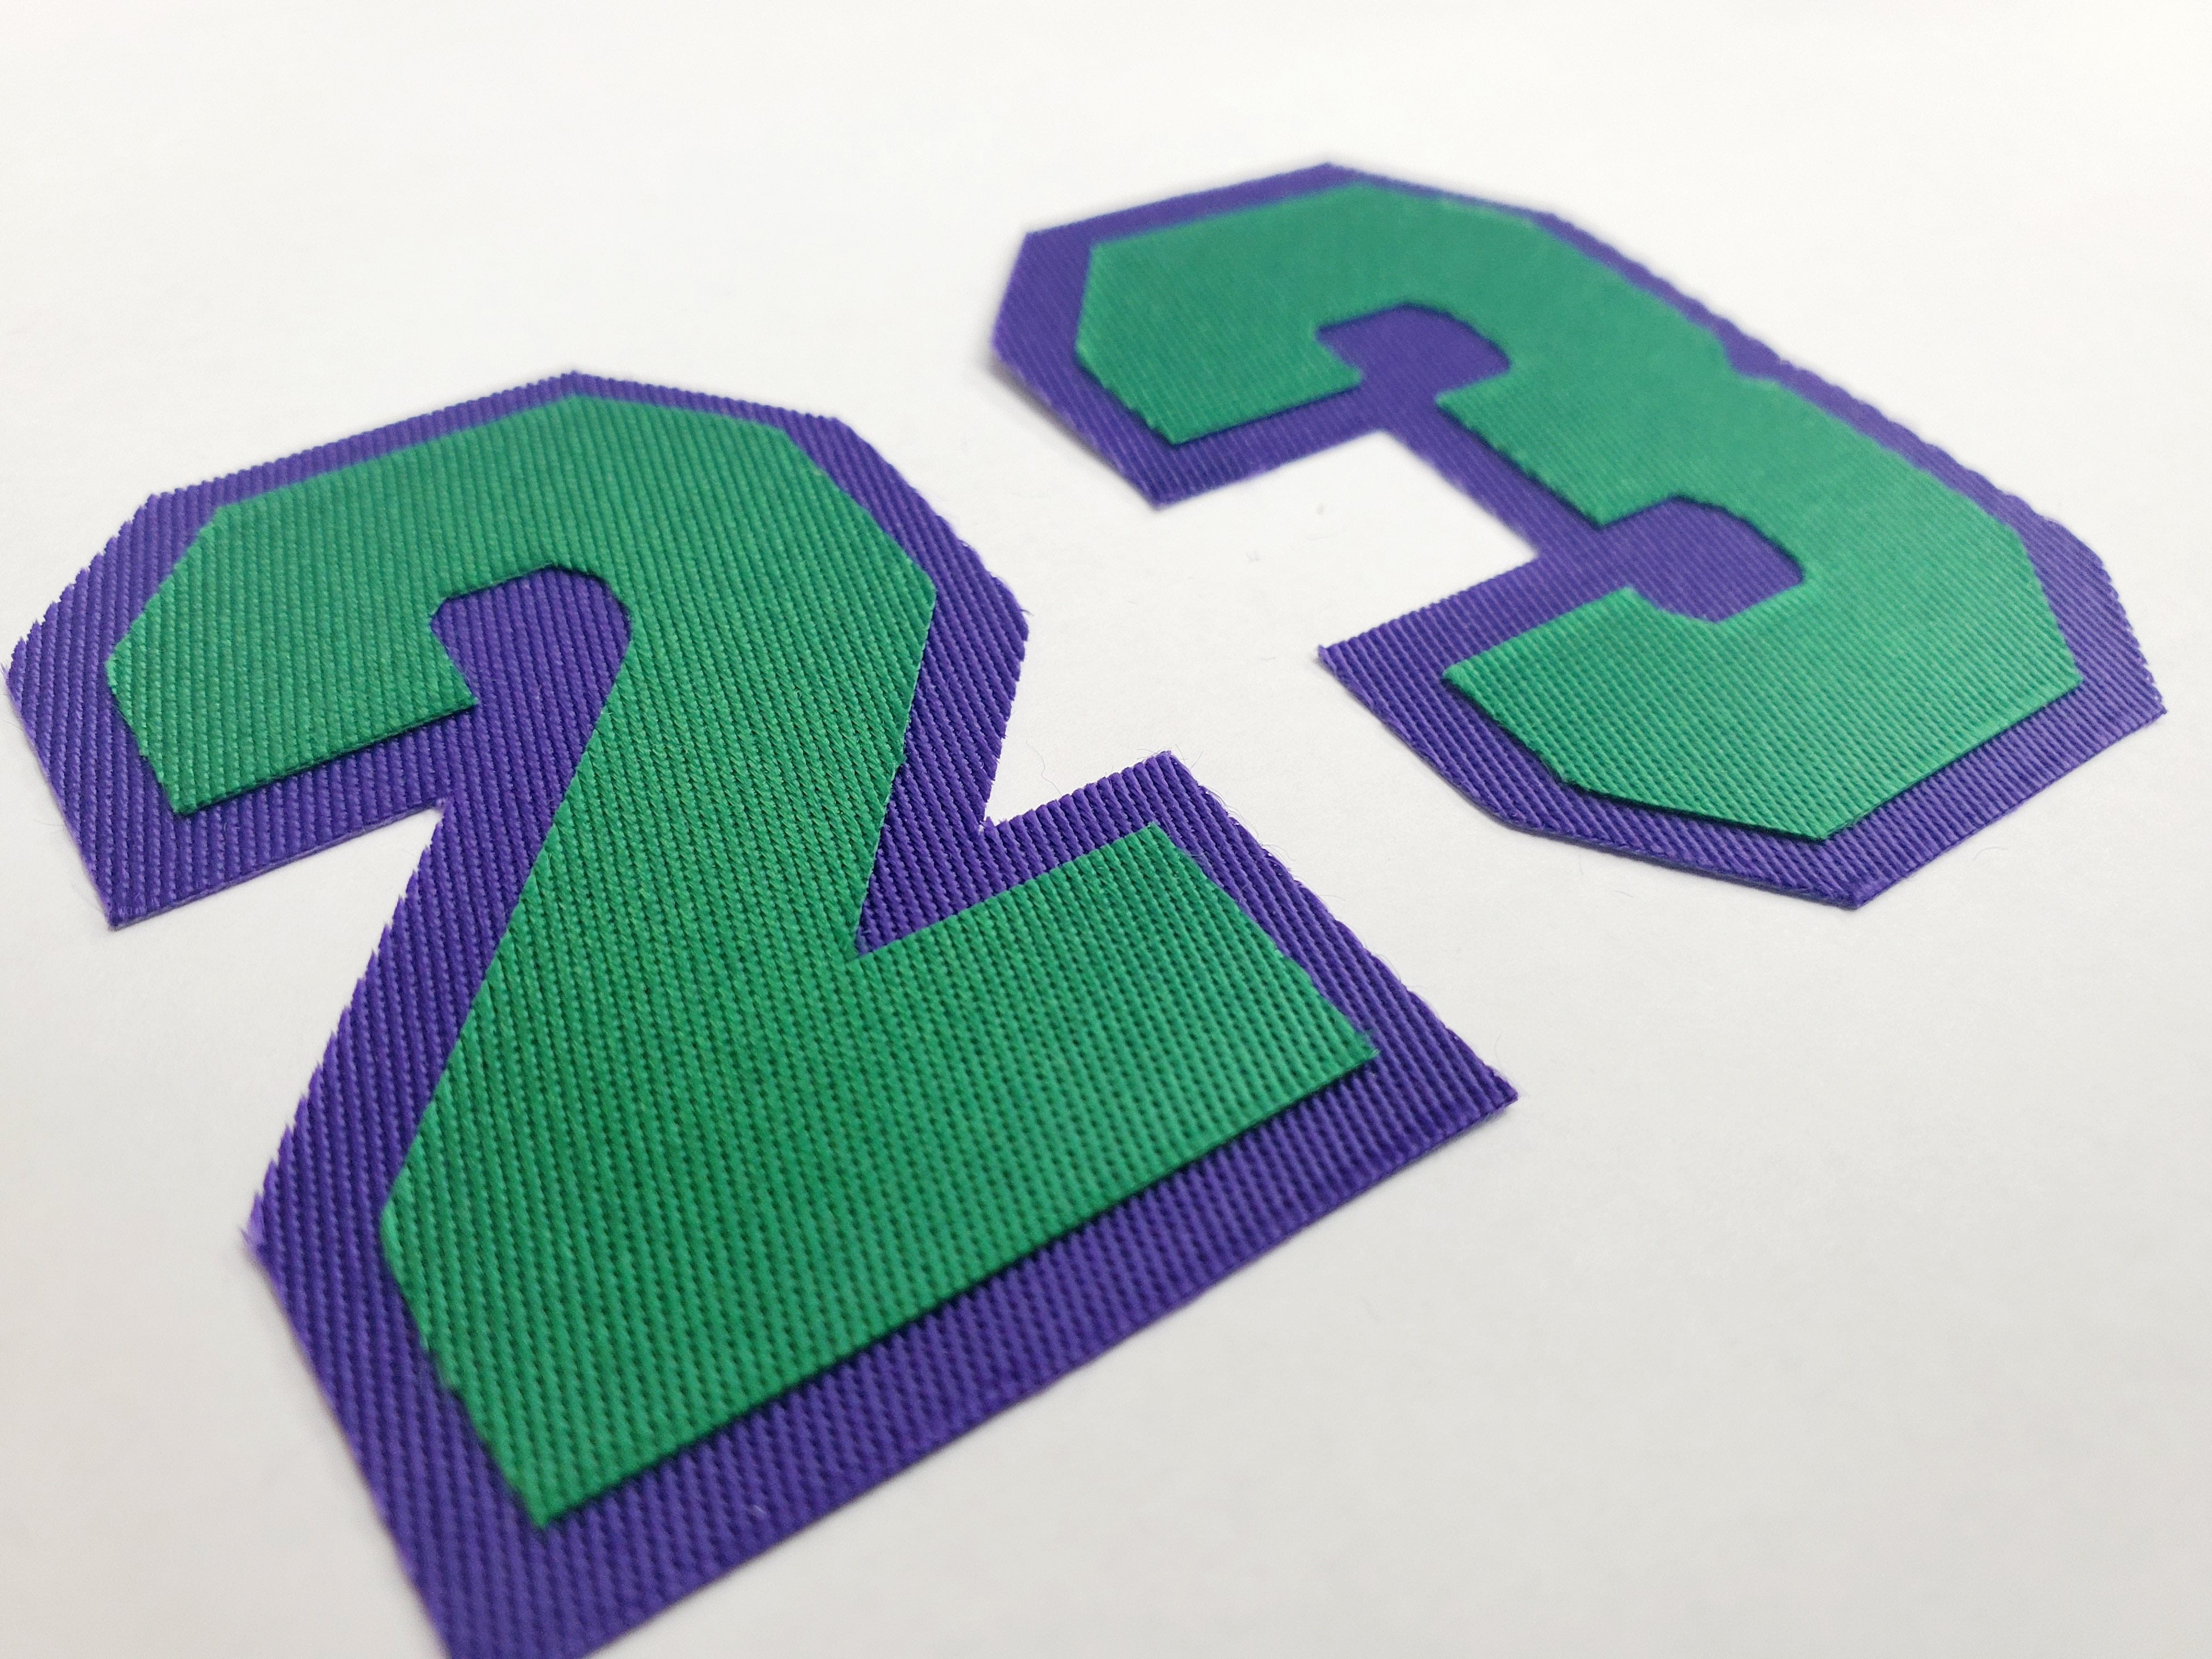 Arrow Emblems > Products > Patches > Tackle Twill > Tackle Twill